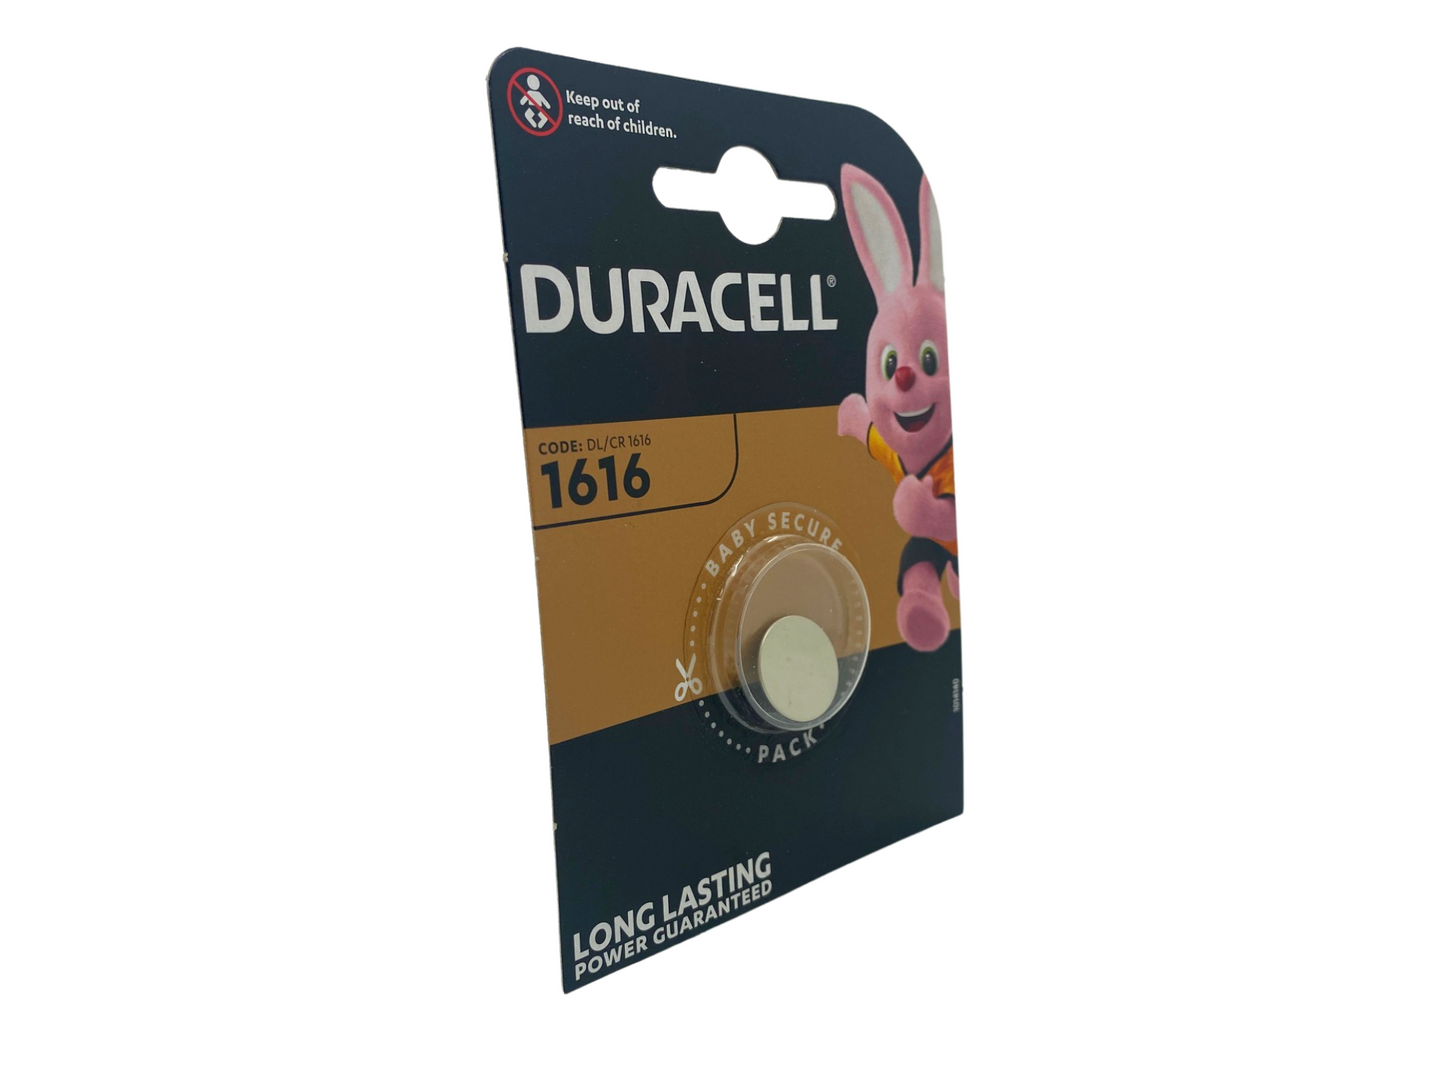 Duracell CR1616 Lithium Cell Battery